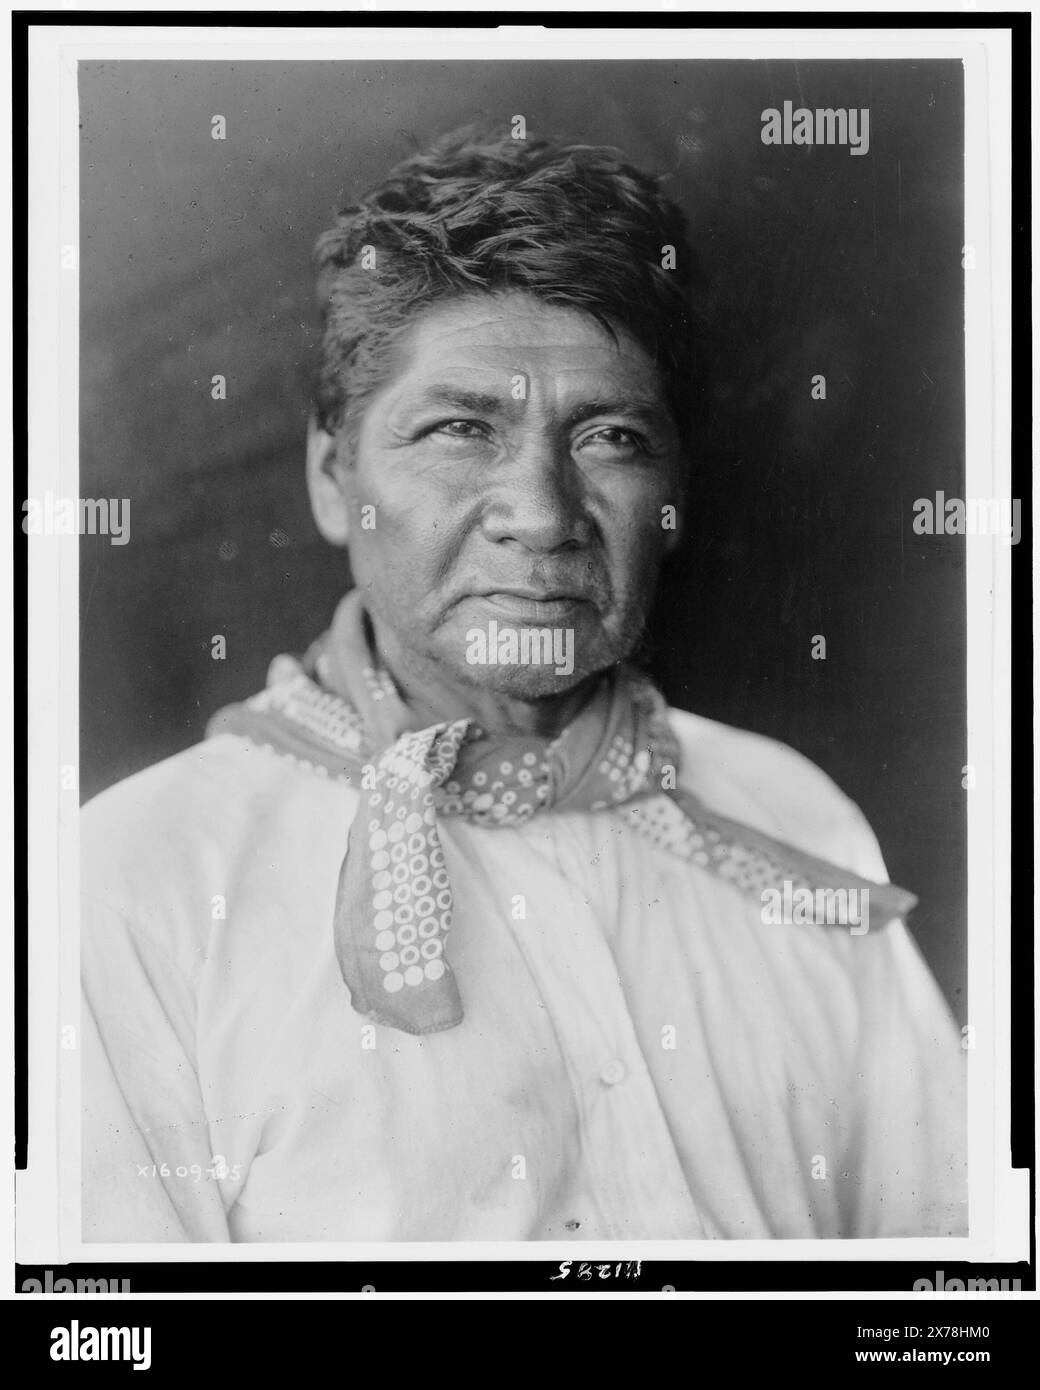 Marcos, Palm Cañon Cahuilla, half-length portrait, facing slightly right, Edward S. Curtis Collection., Curtis no. 1609-05., Published in: The North American Indian / Edward S. Curtis. [Seattle, Wash.] : Edward S. Curtis, 1907-30, suppl., v. 15, pl. 517.. Indians of North America, 1900-1910. , Cahuilla Indians, 1900-1910. Stock Photo